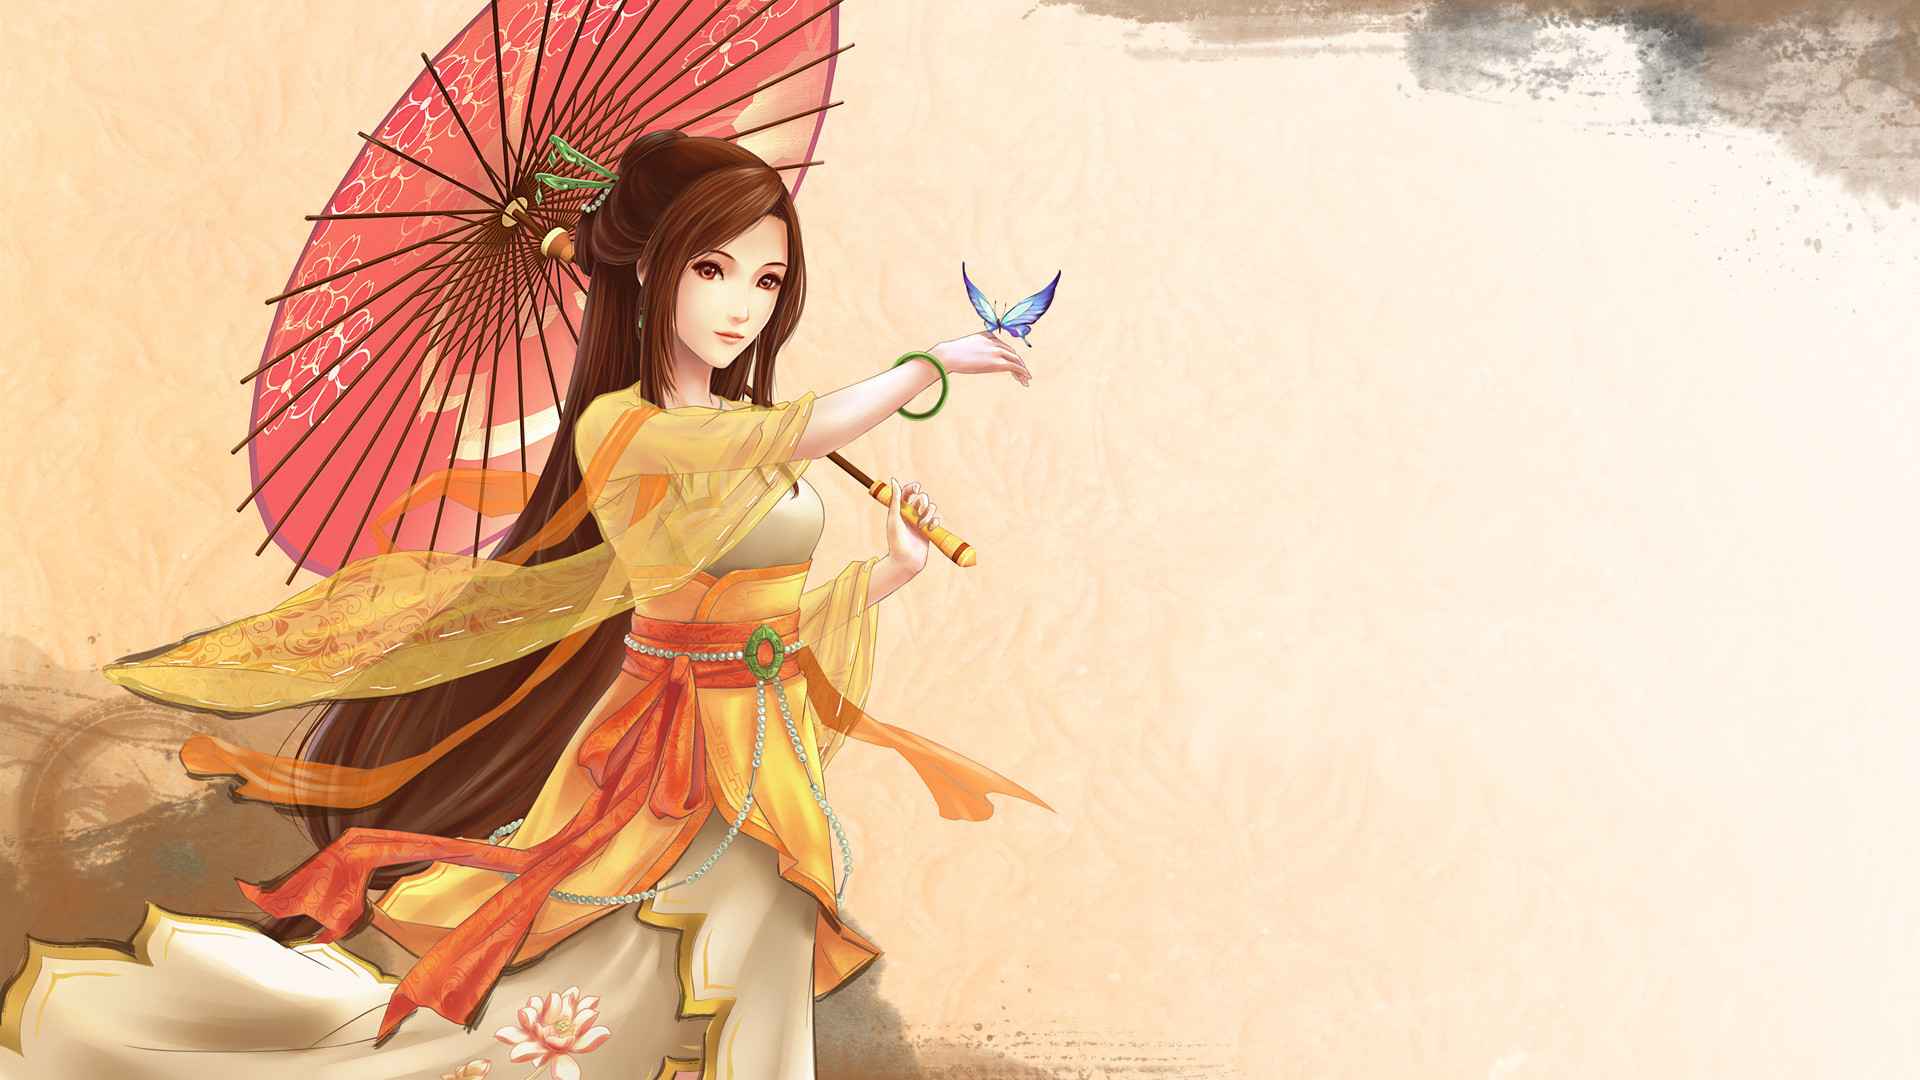 1920x1080 Download the following Free Asian Wallpaper 22817 by clicking the orange  button positioned underneath the "